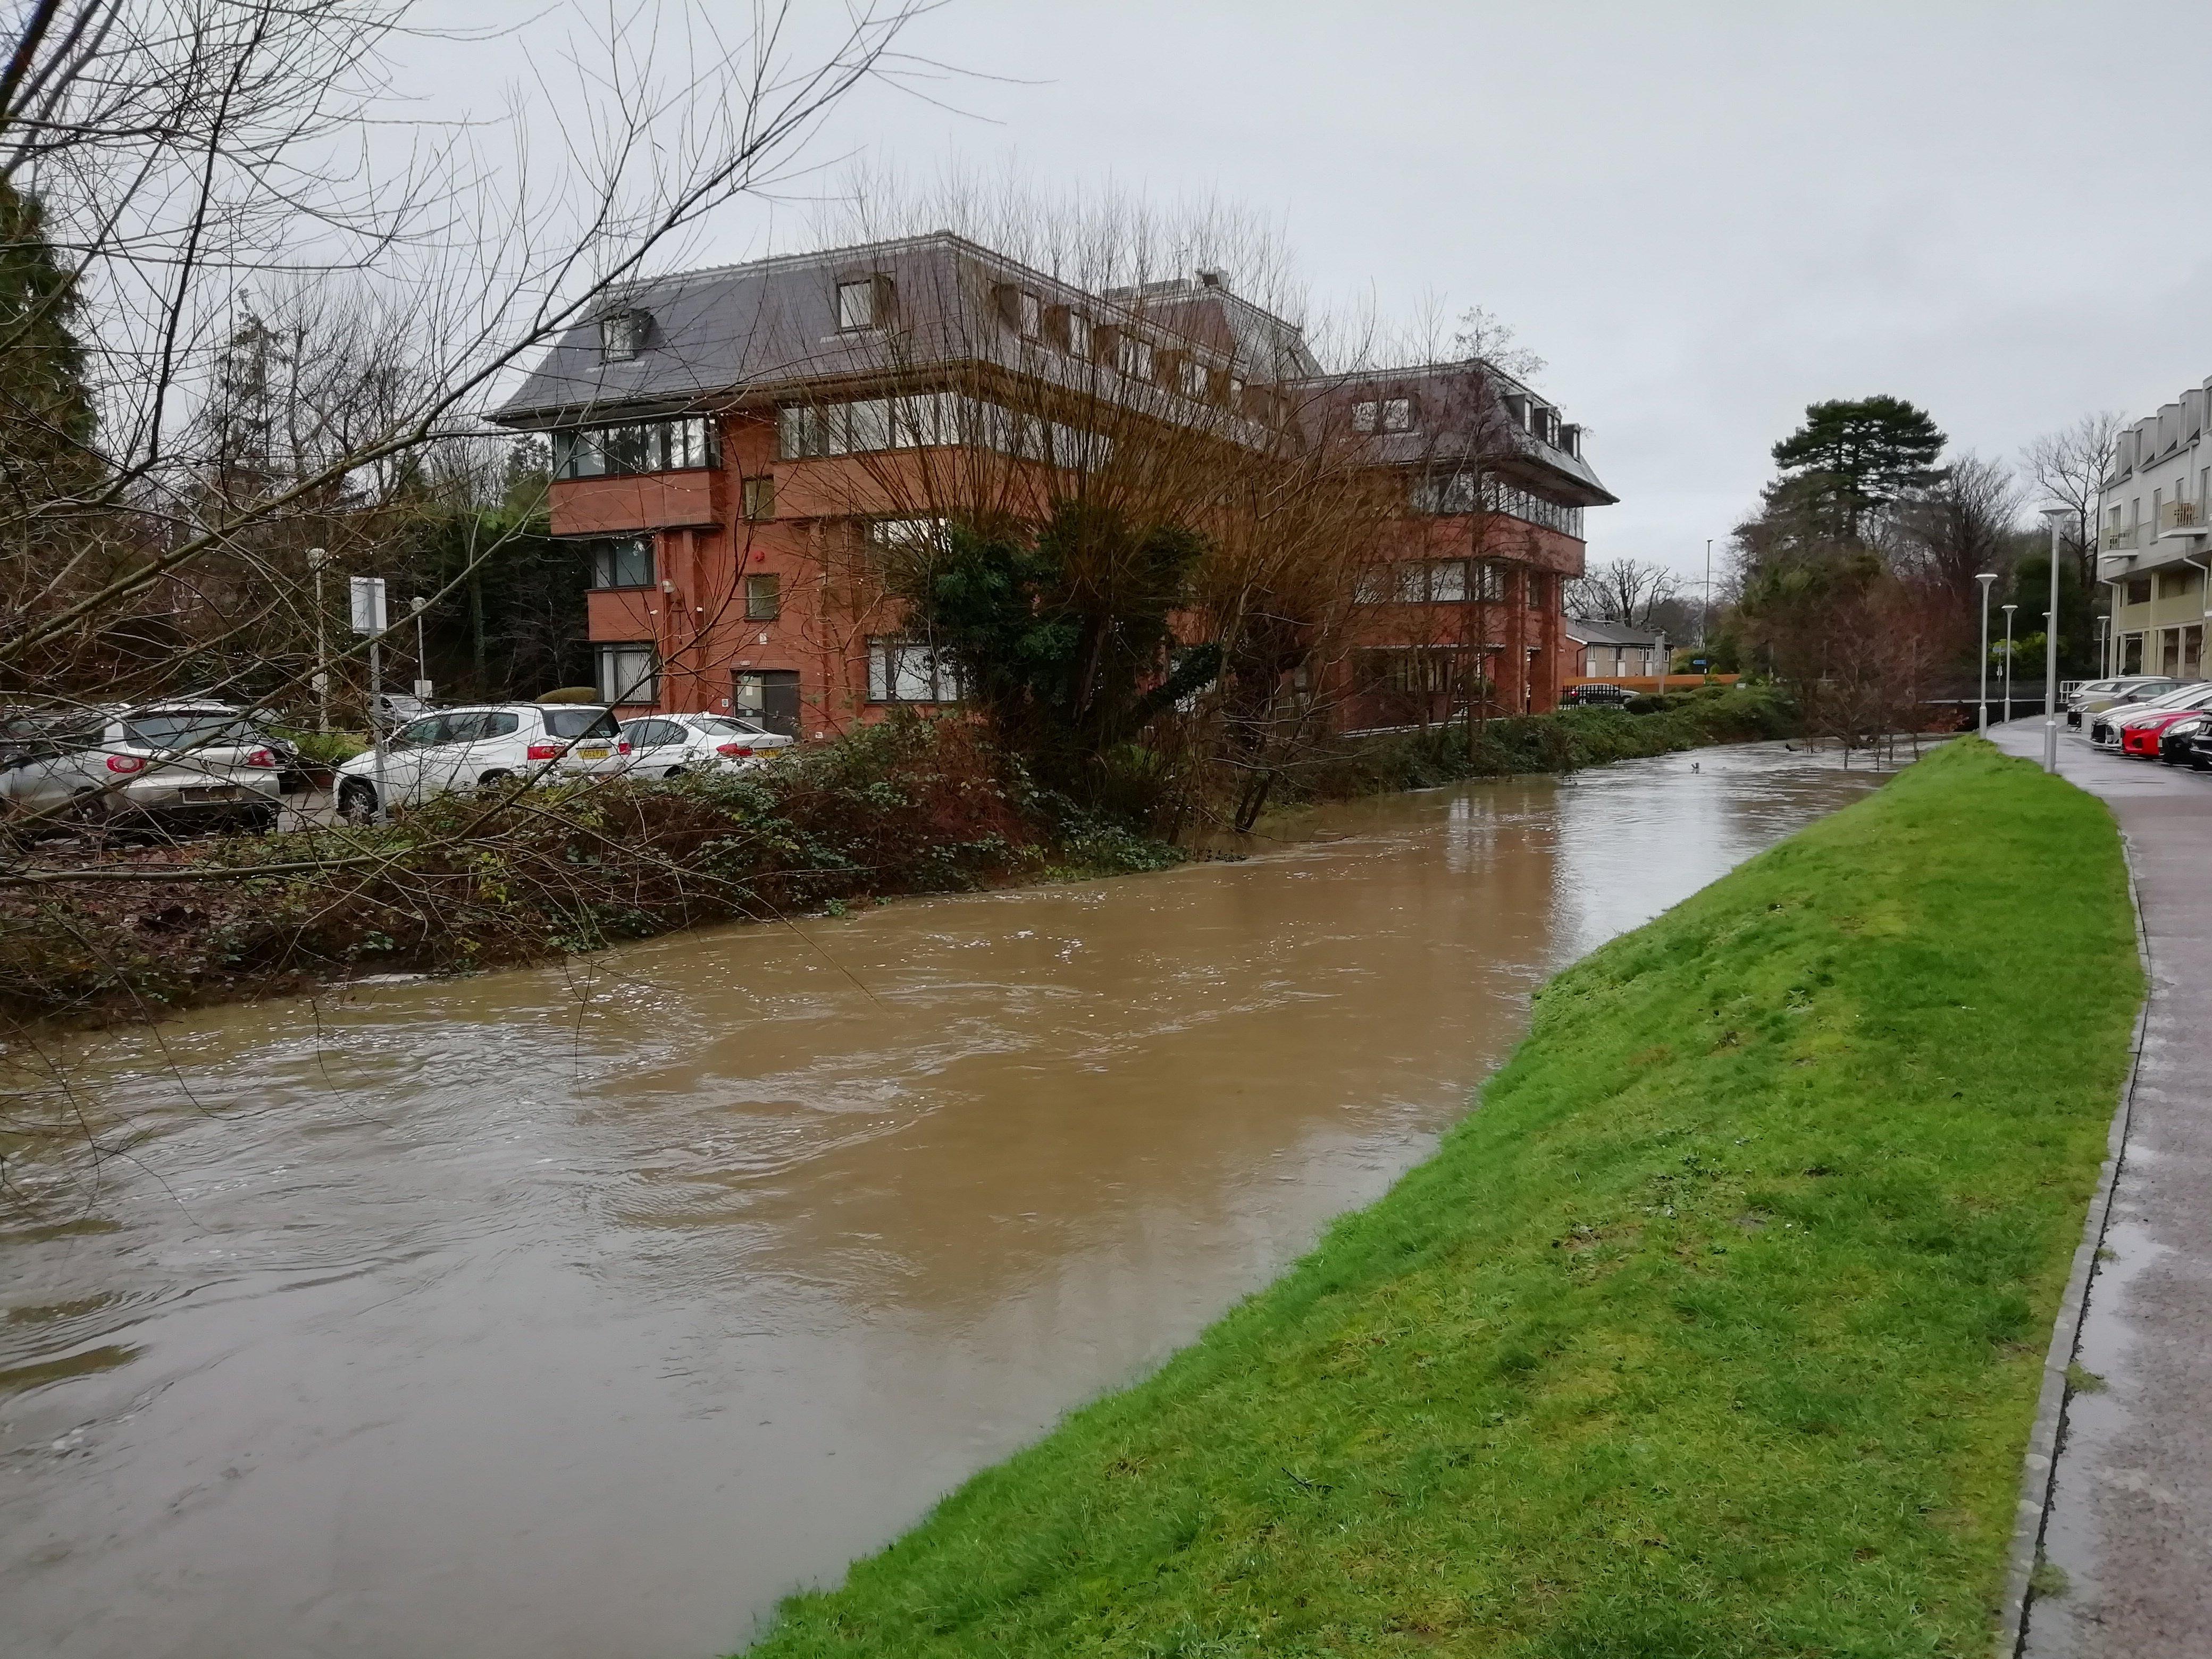 The River Arun has risen to just a few feet below its banks